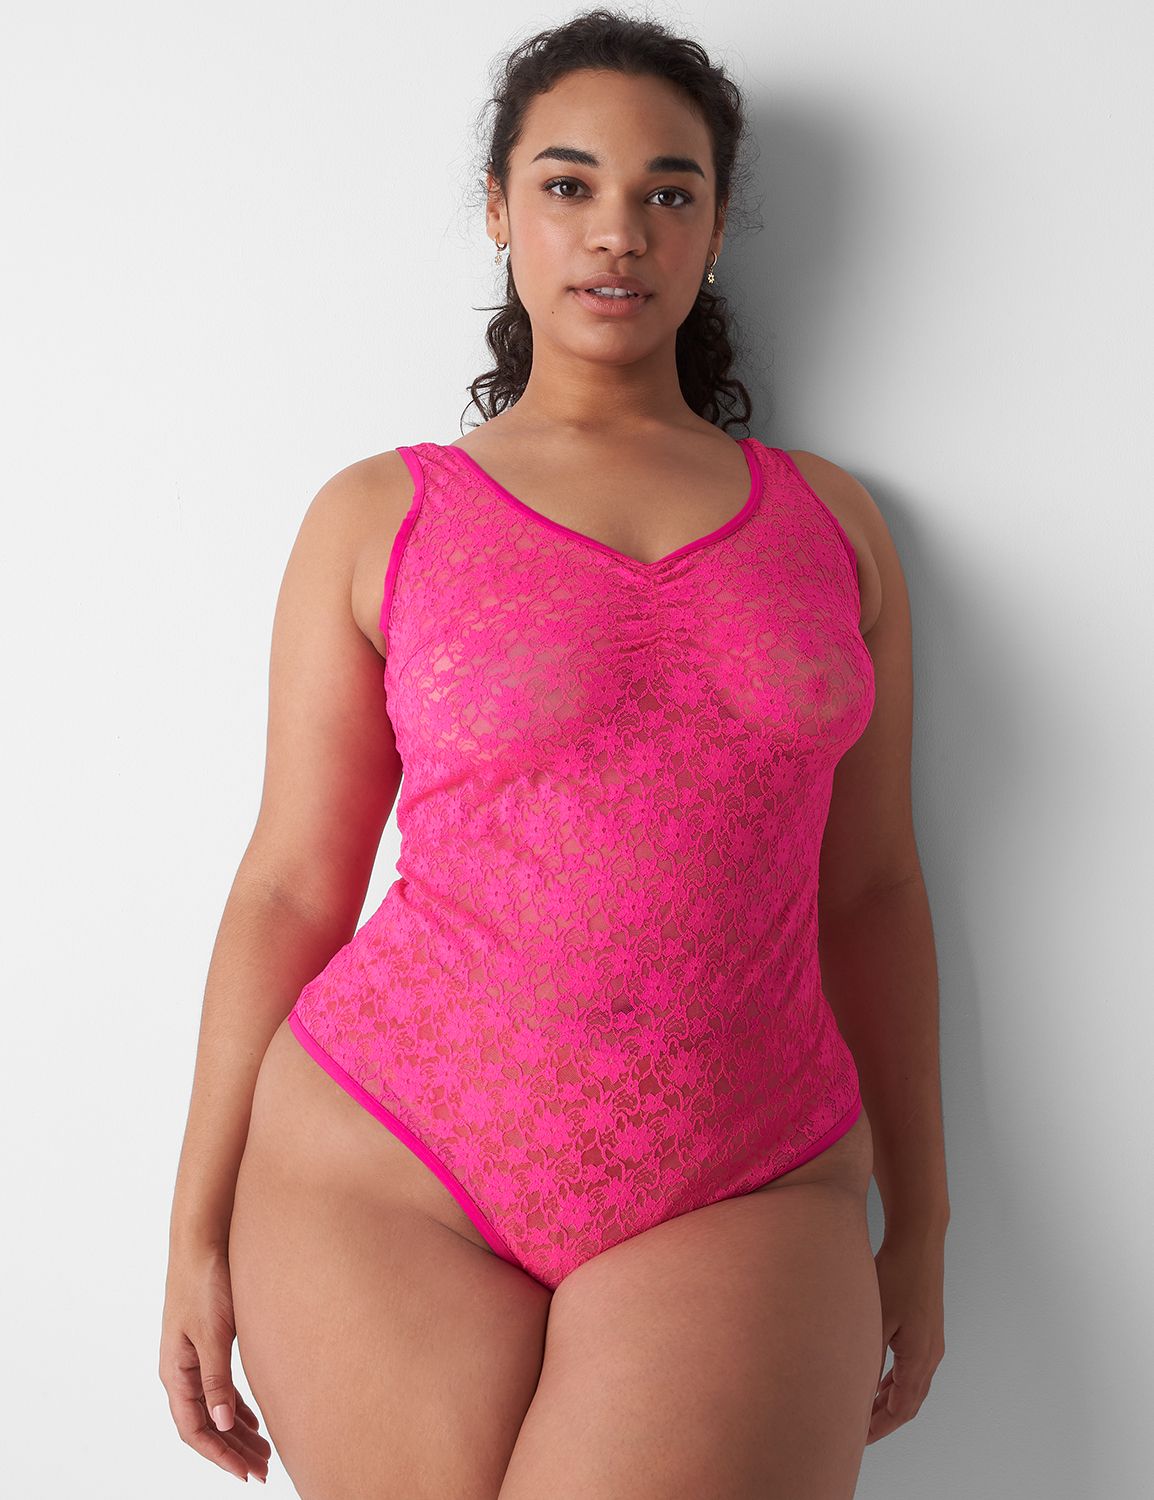 All-Over Lace Bodysuit